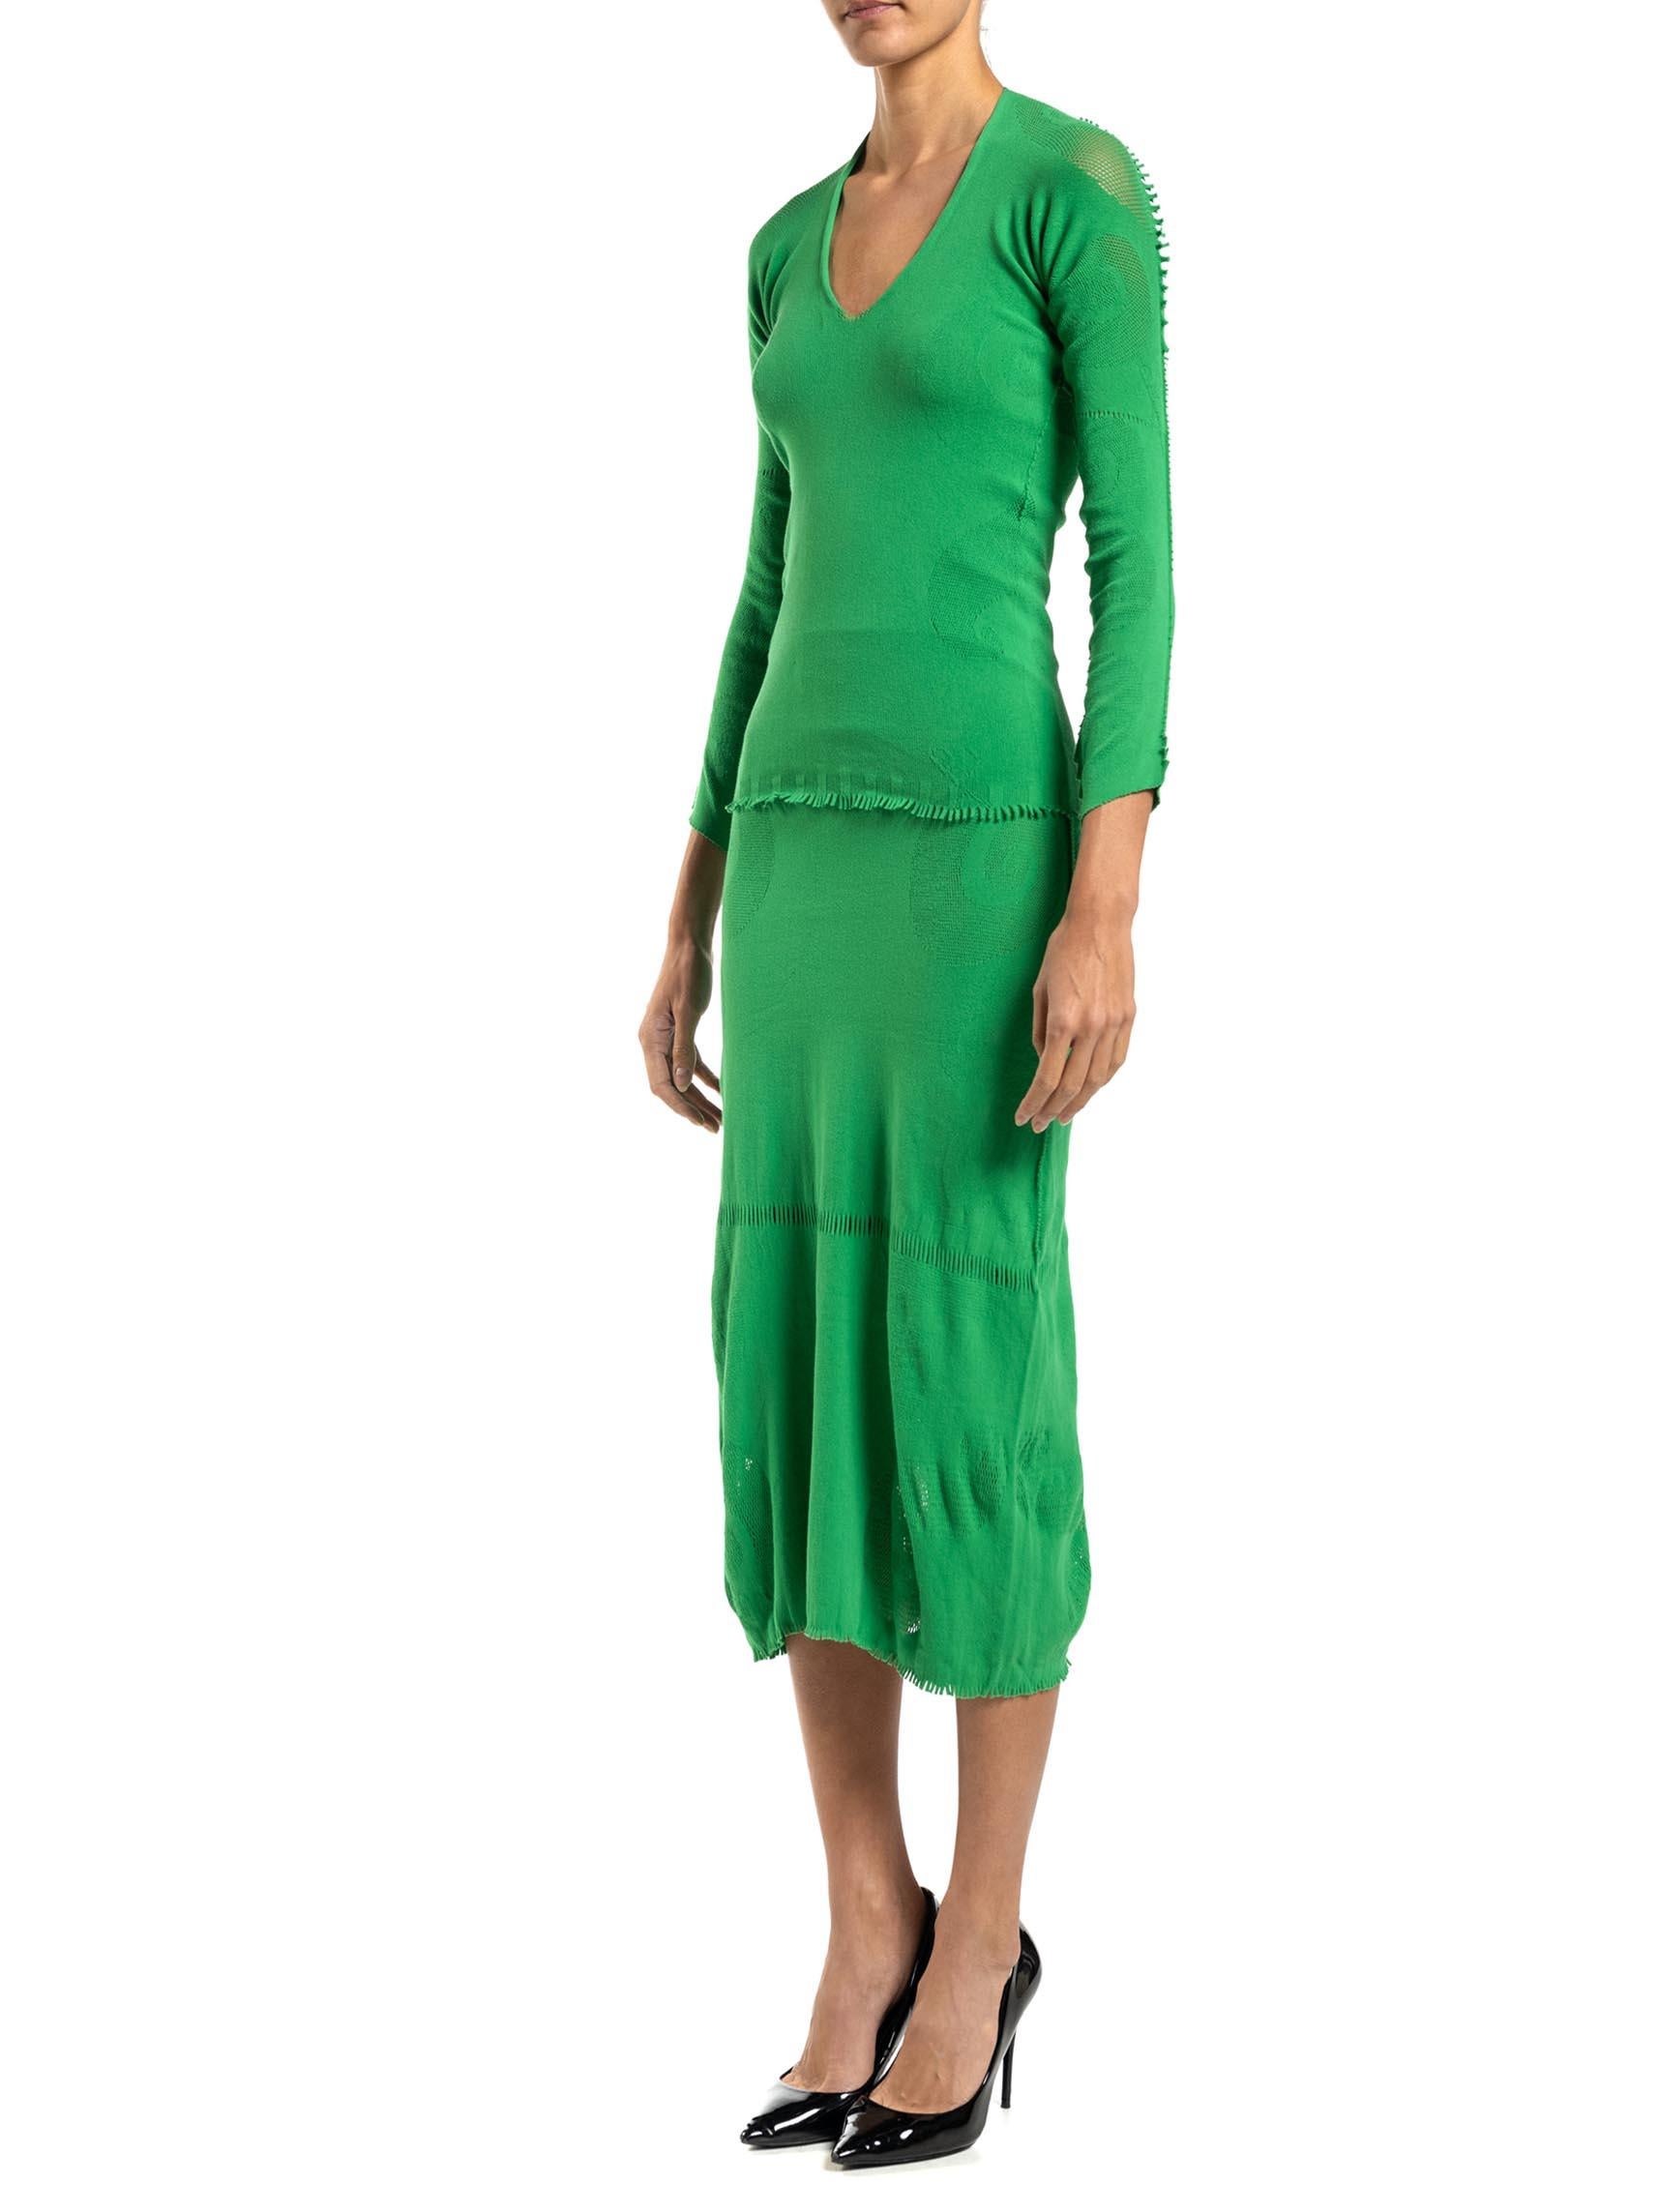 1990S A-POC BY ISSEY MIYAKE Grass Green Poly Blend Knit Top & Skirt Ensemble For Sale 7